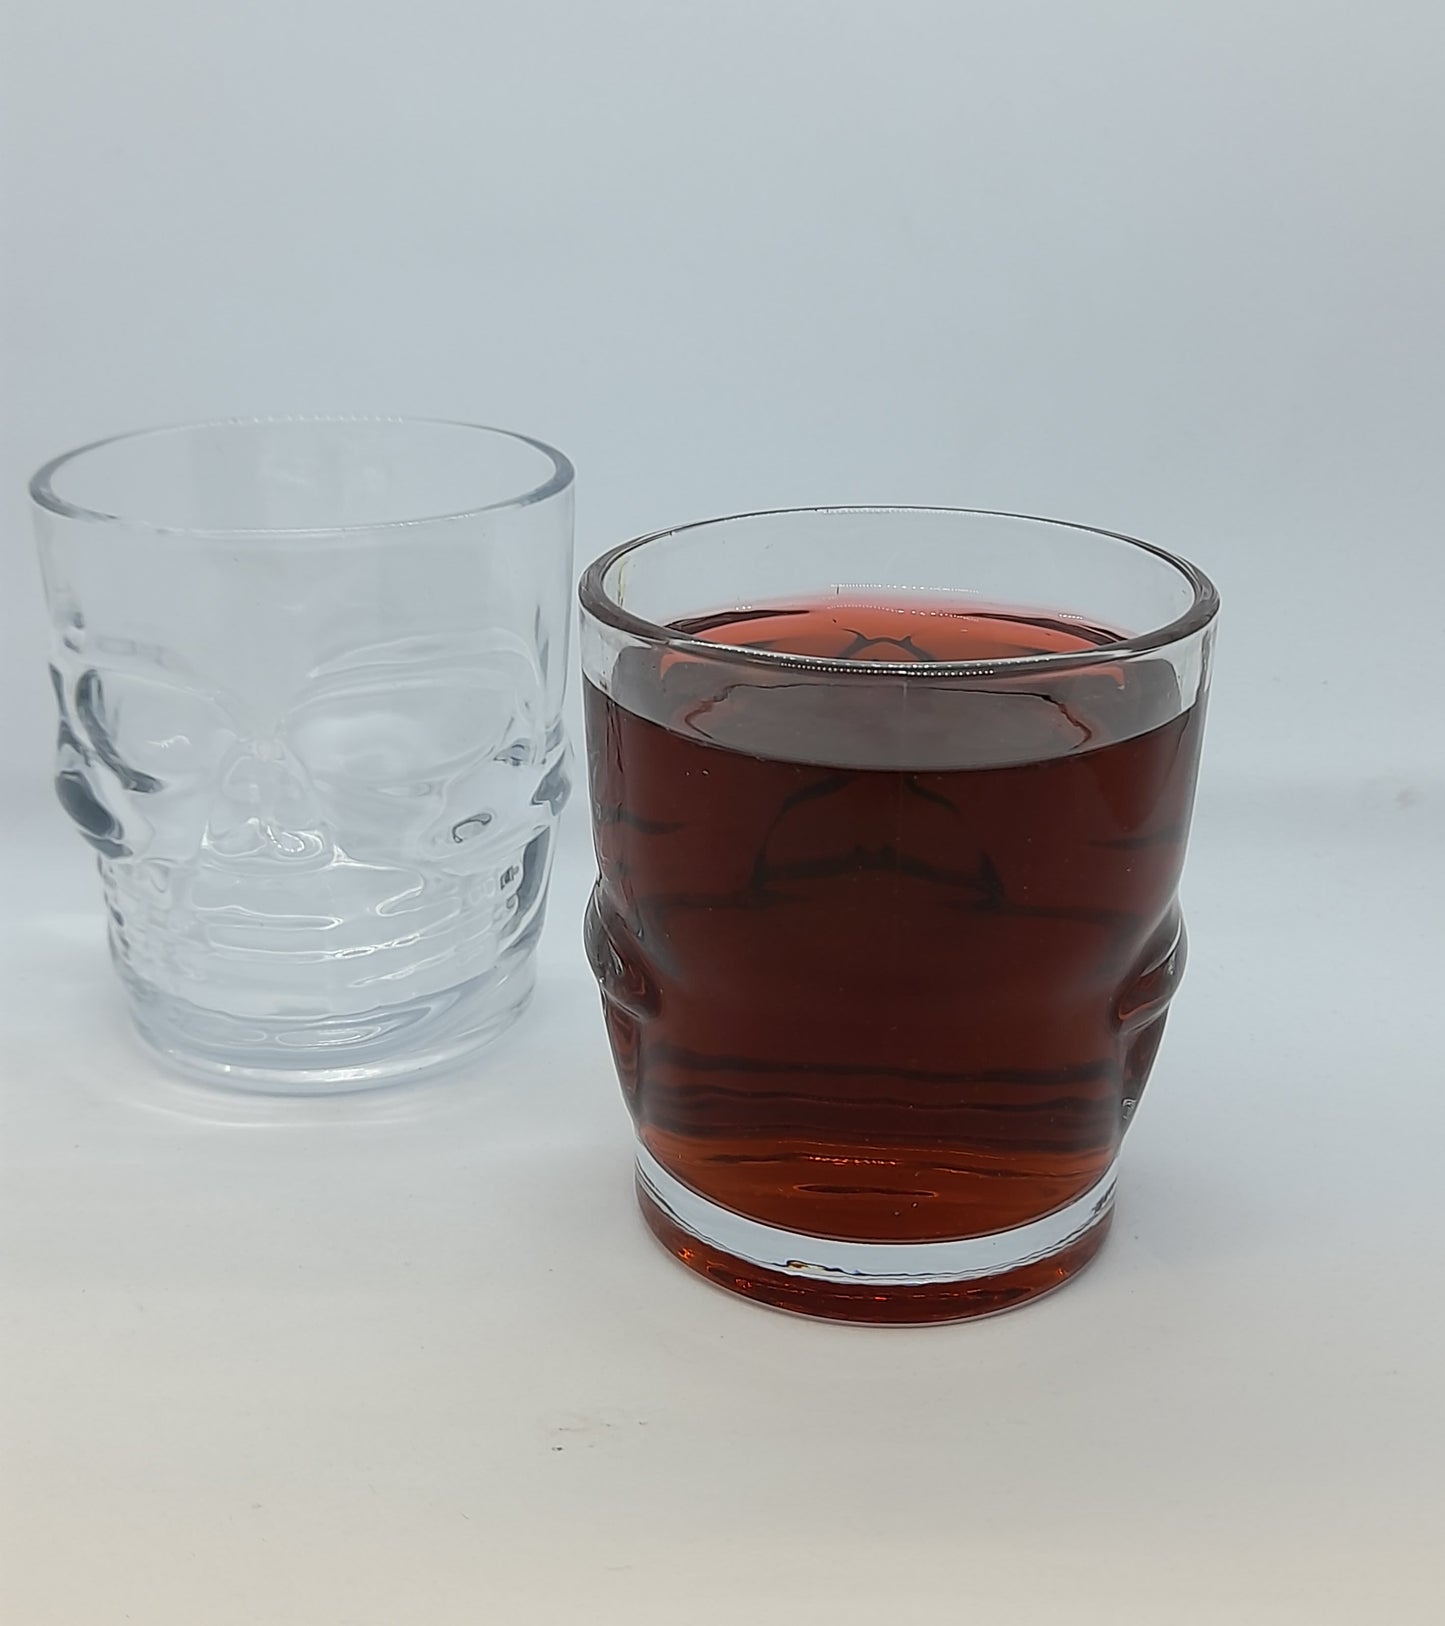 Glass - Skull Cup